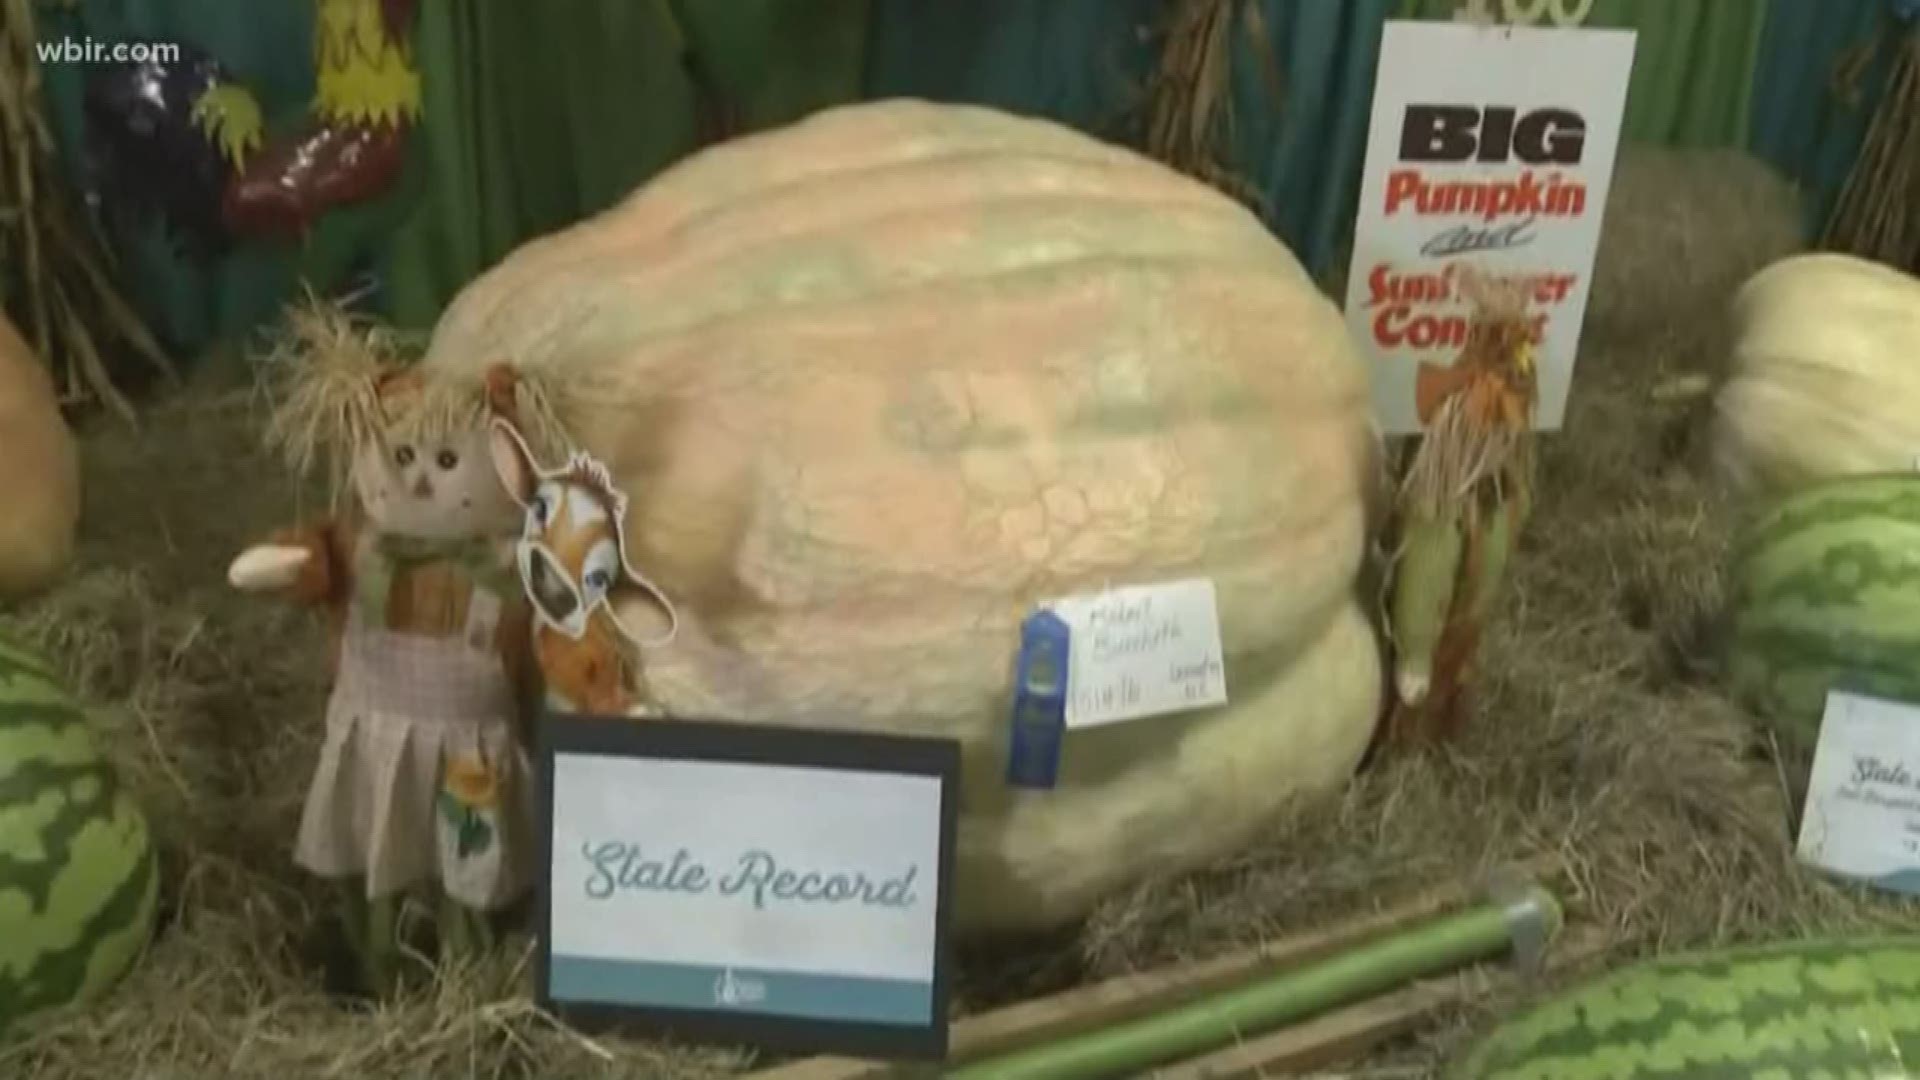 From the area's largest pumpkin to livestock, the Tennessee Valley Fair has plenty of great things to see and do. Neal Denton visits the Agricultural displays. The fair runs through Sept. 15 at Chilhowee Park. Sept. 11, 2019-4pm.